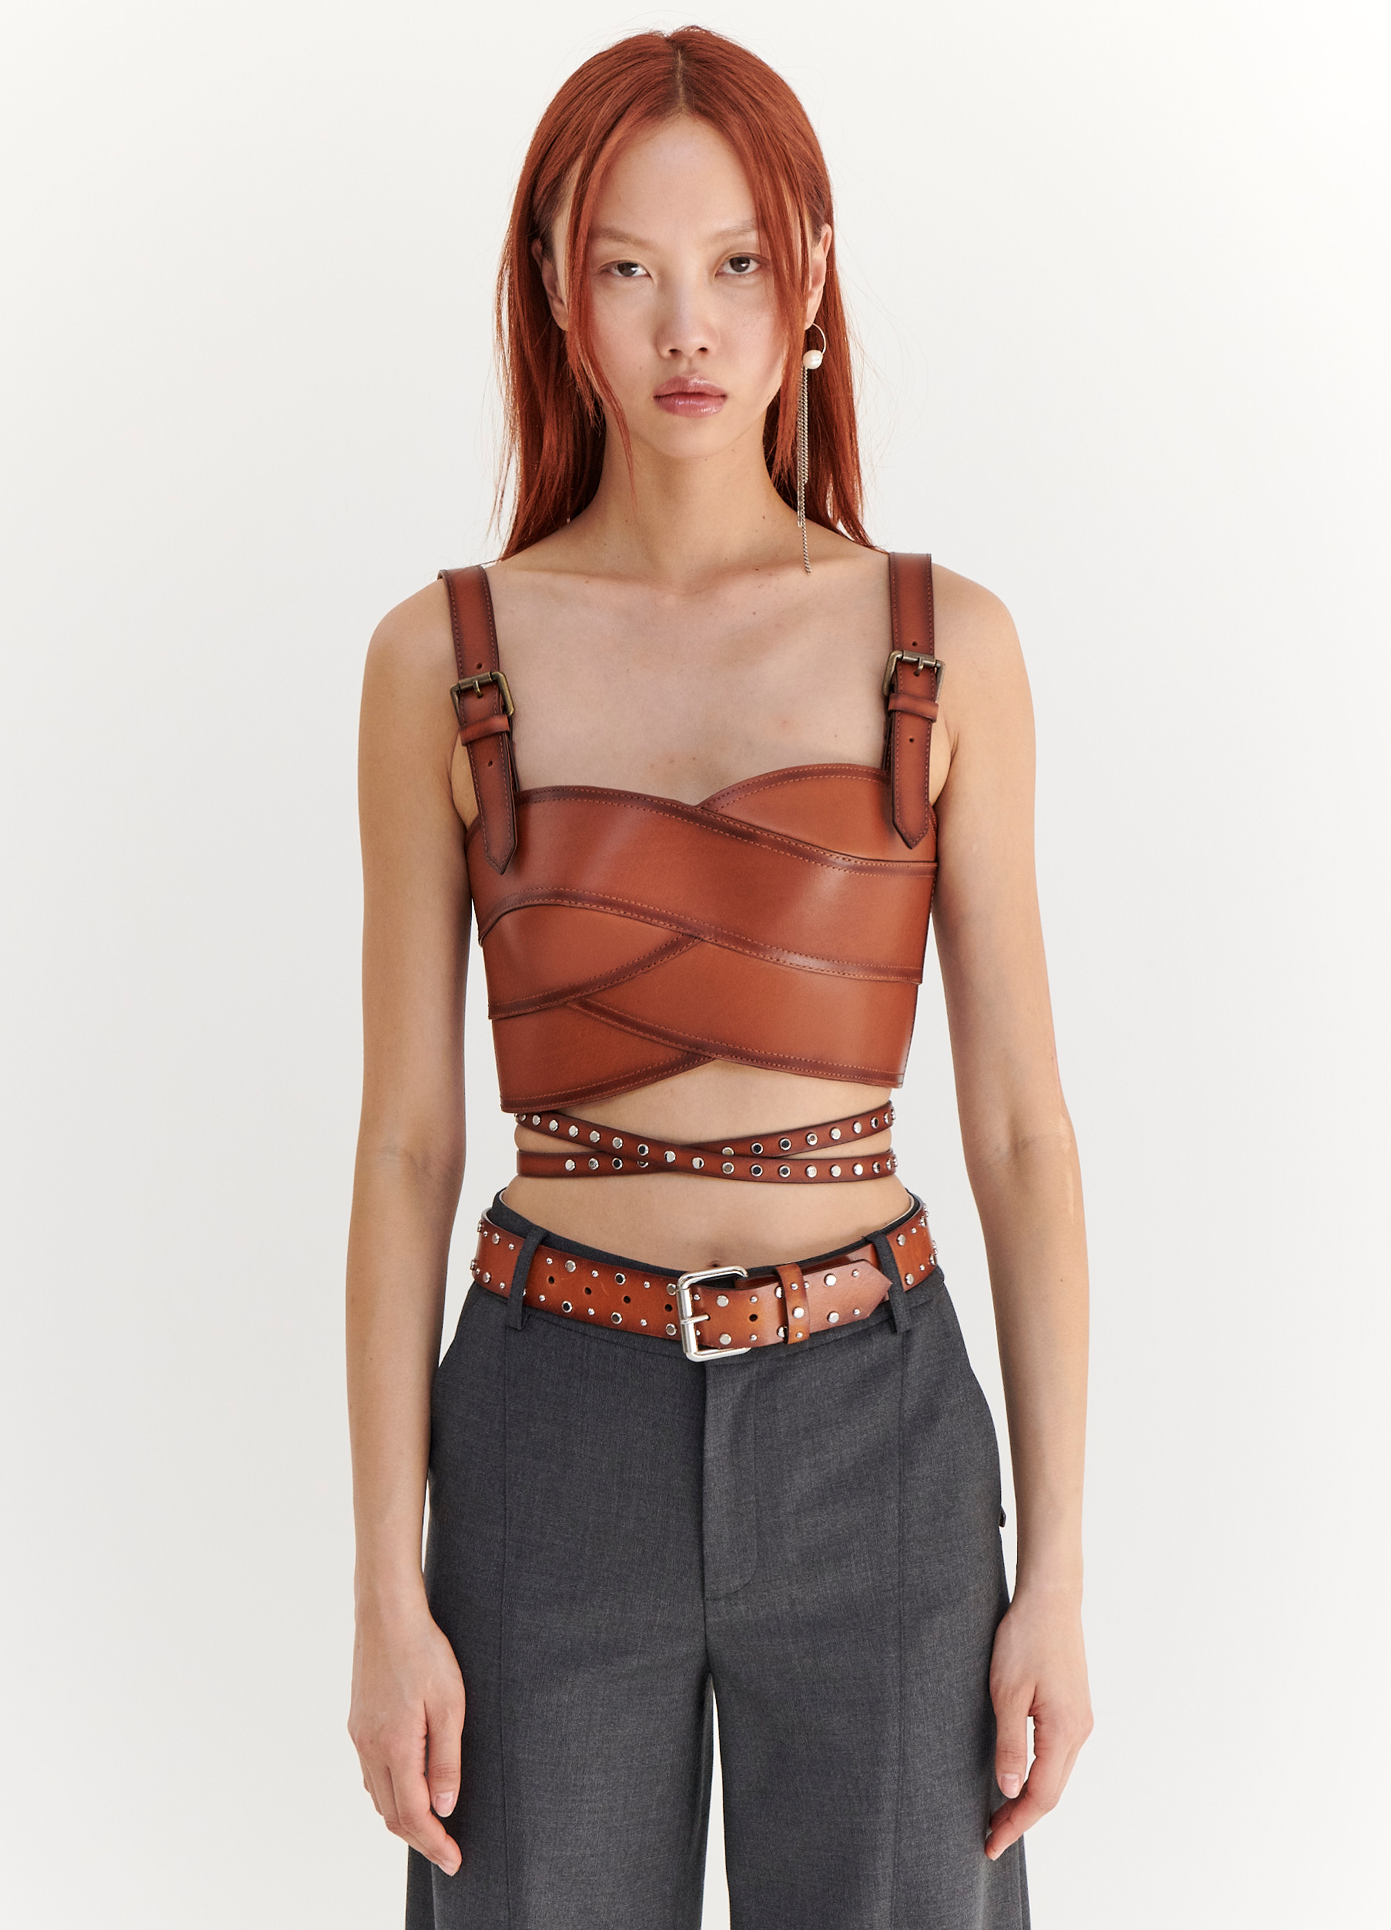 MONSE Studded Leather Belt in Brown on model full front view